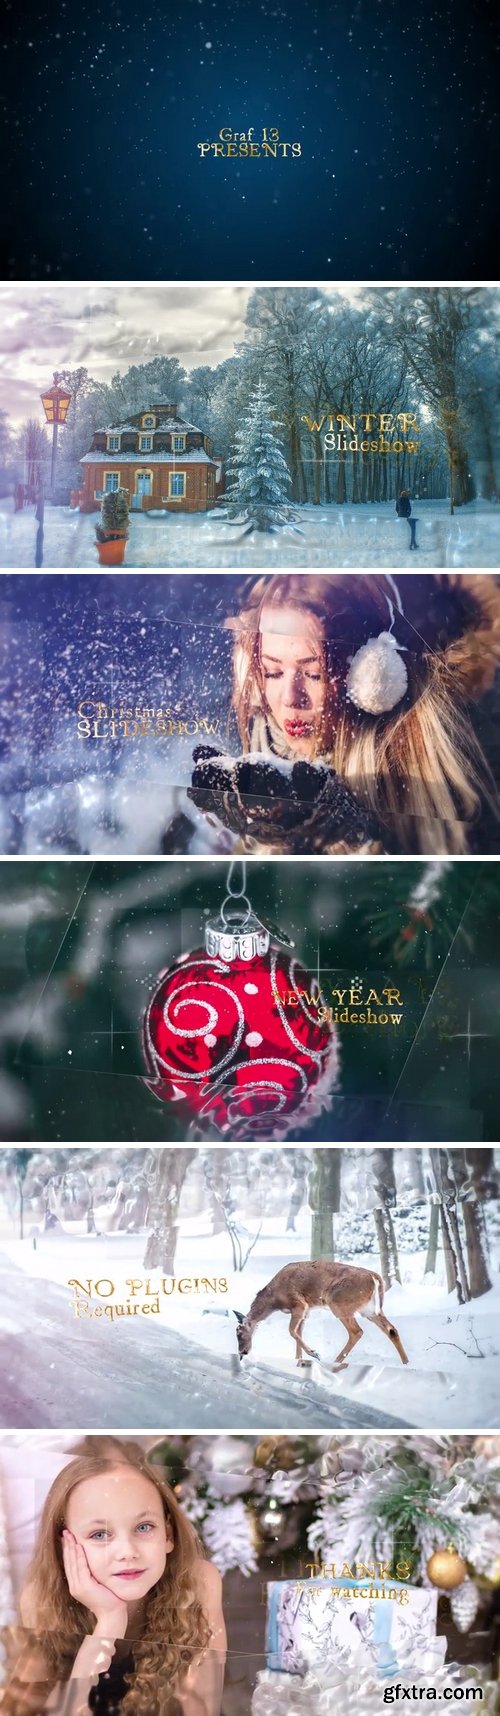 MA - Winter Slideshow After Effects Templates 151026